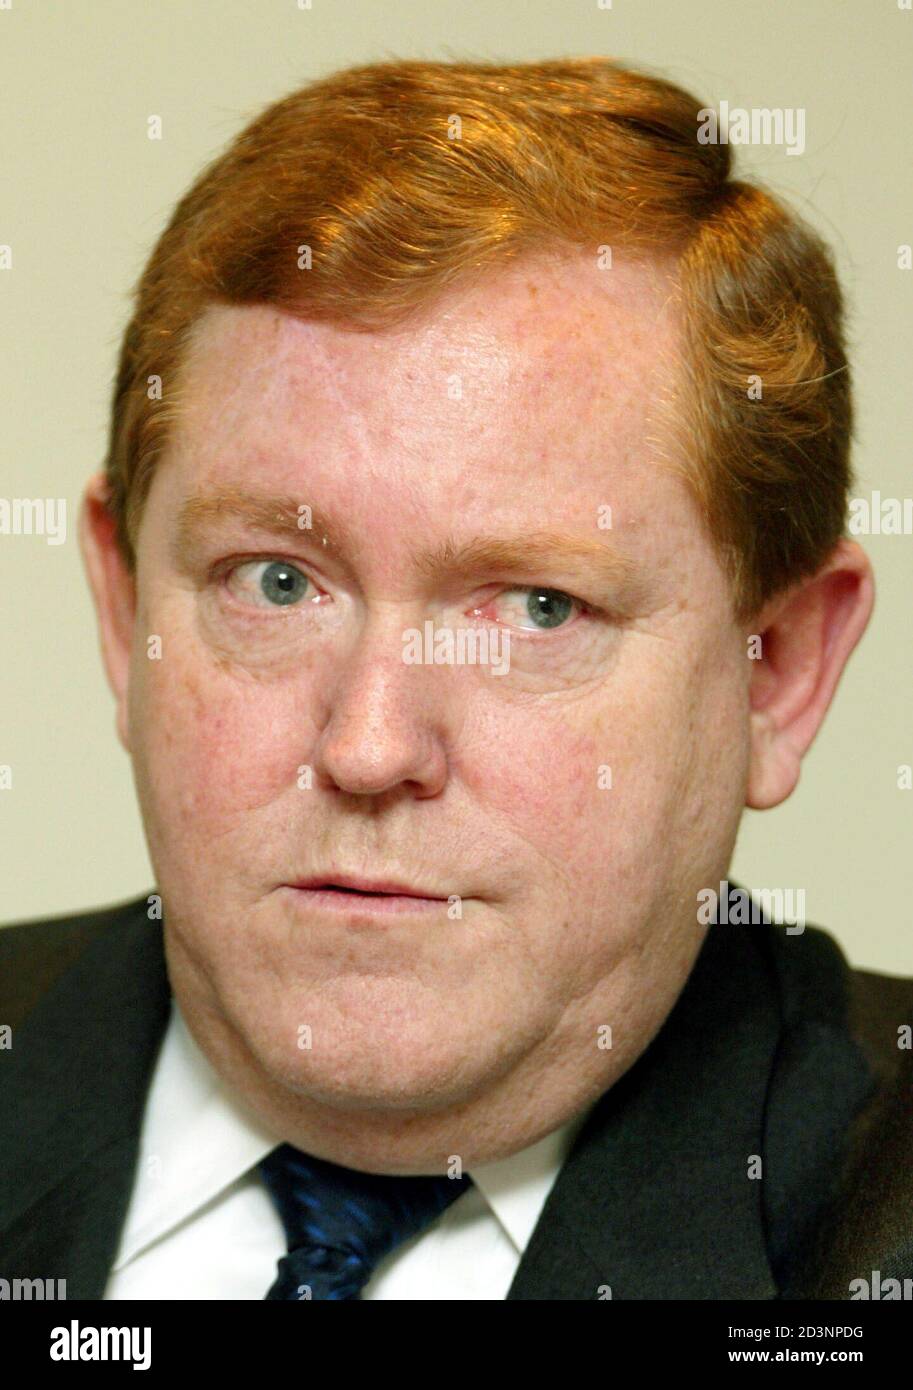 Thomas Moran, Executive of the National Committee on American Foreign  Policy speaks during a news conference on the year-end review on the  Northern Ireland Peace Process in Belfast, February 27, 2003. [The